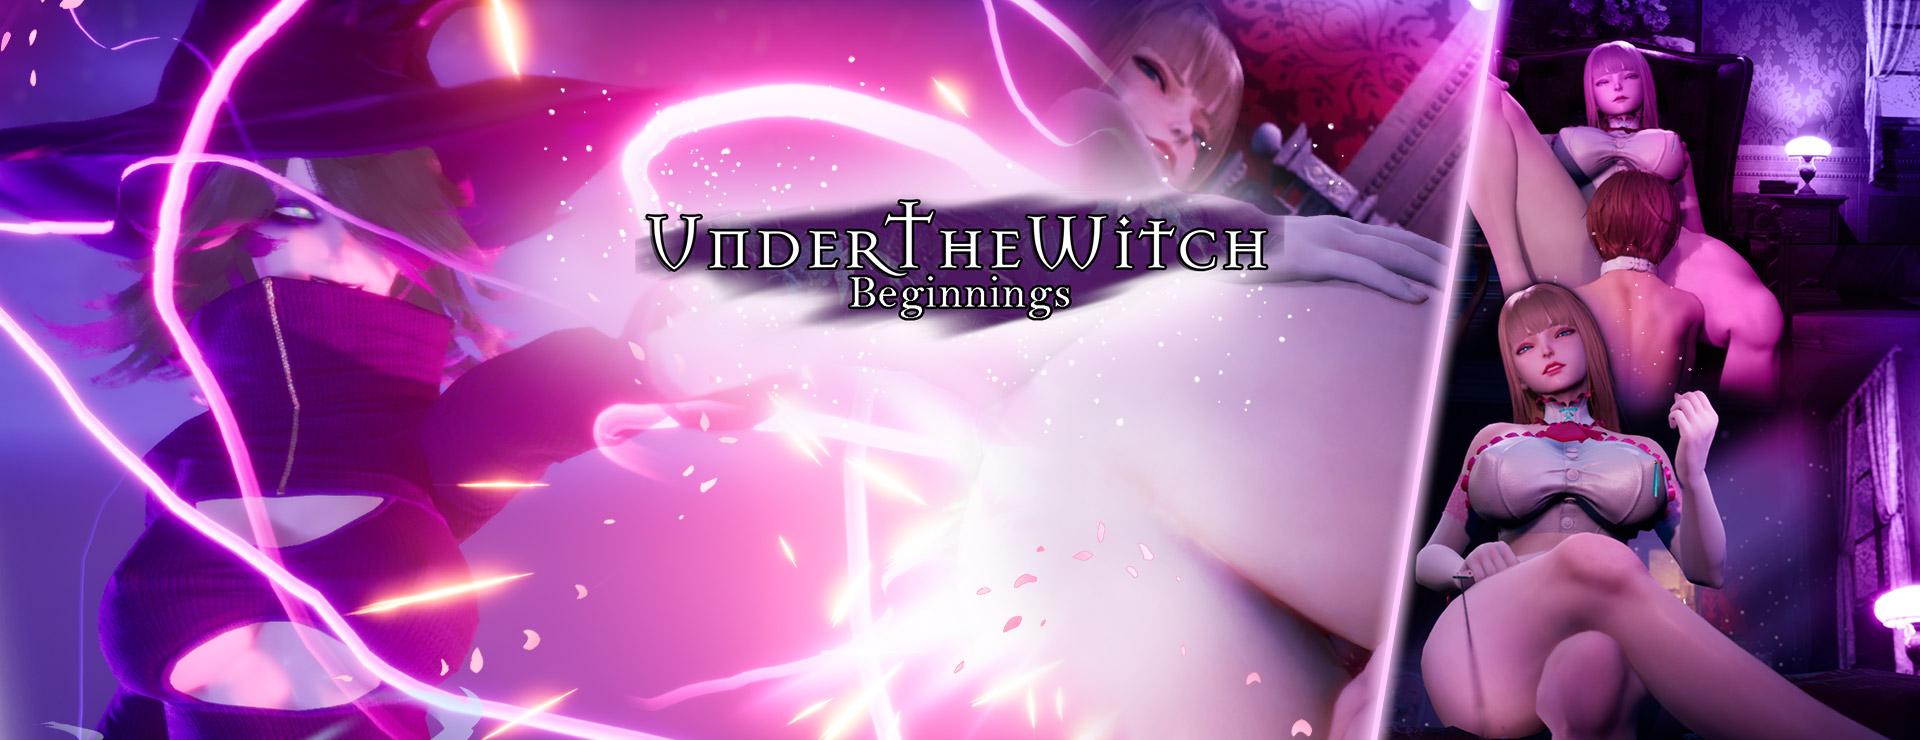 Under The Witch: Beginnings - アクションアドベンチャー ゲーム